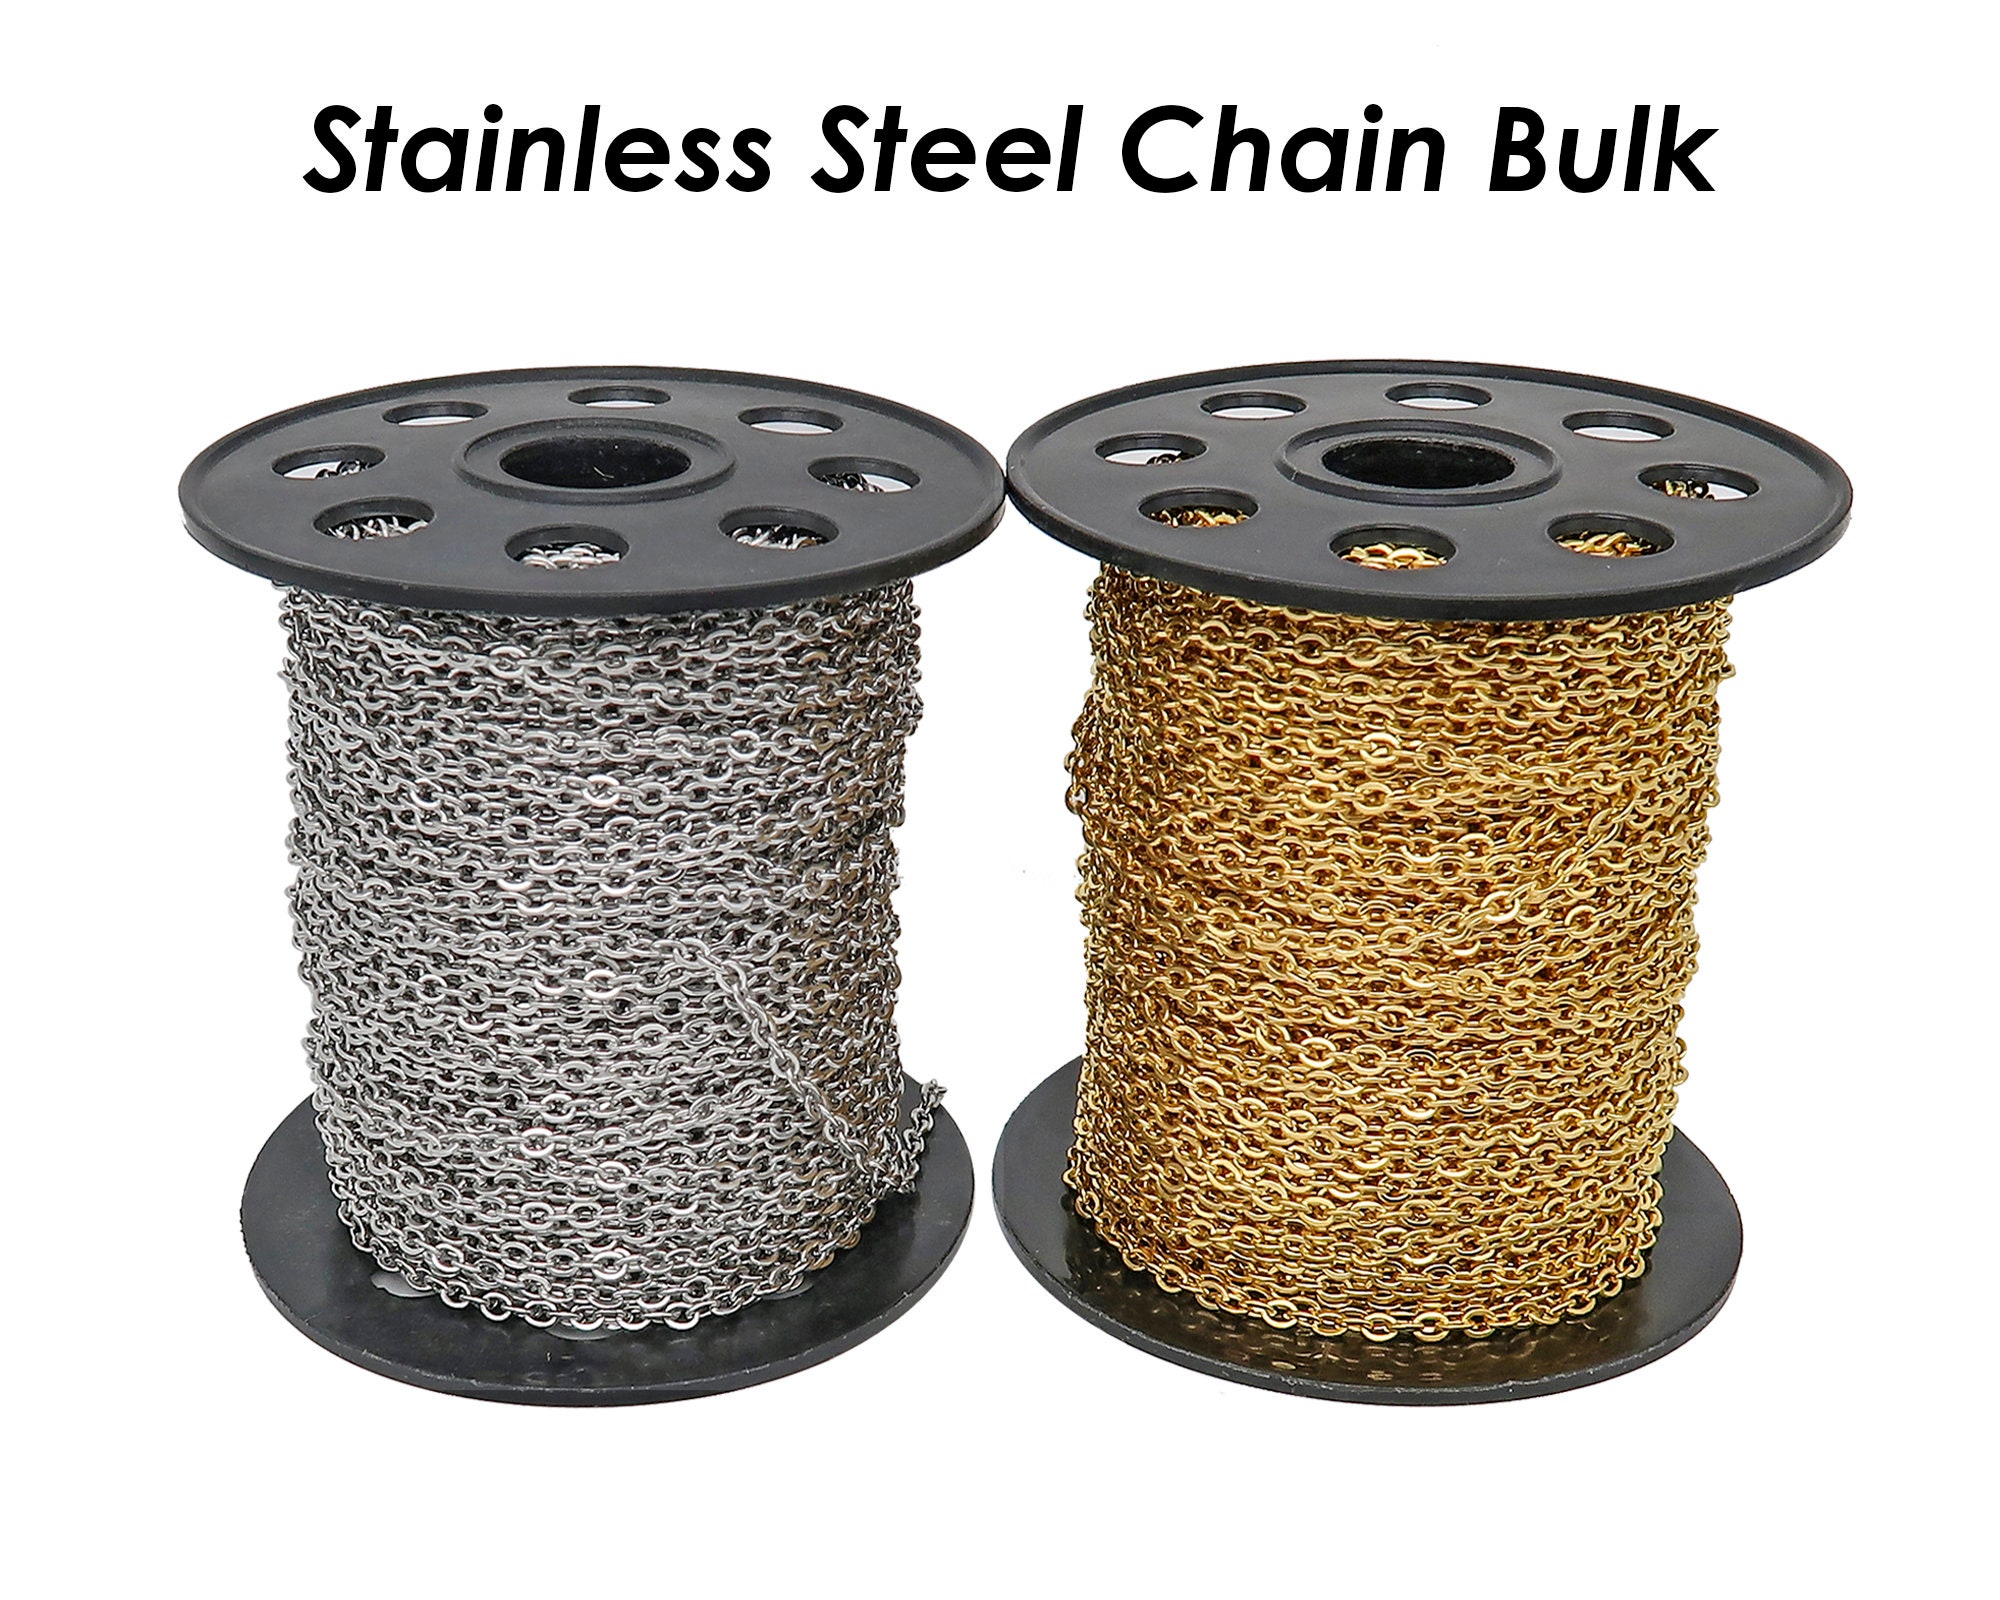 30 Feet X Stainless Steel Chain Bulk by the Foot, Bulk Chain by